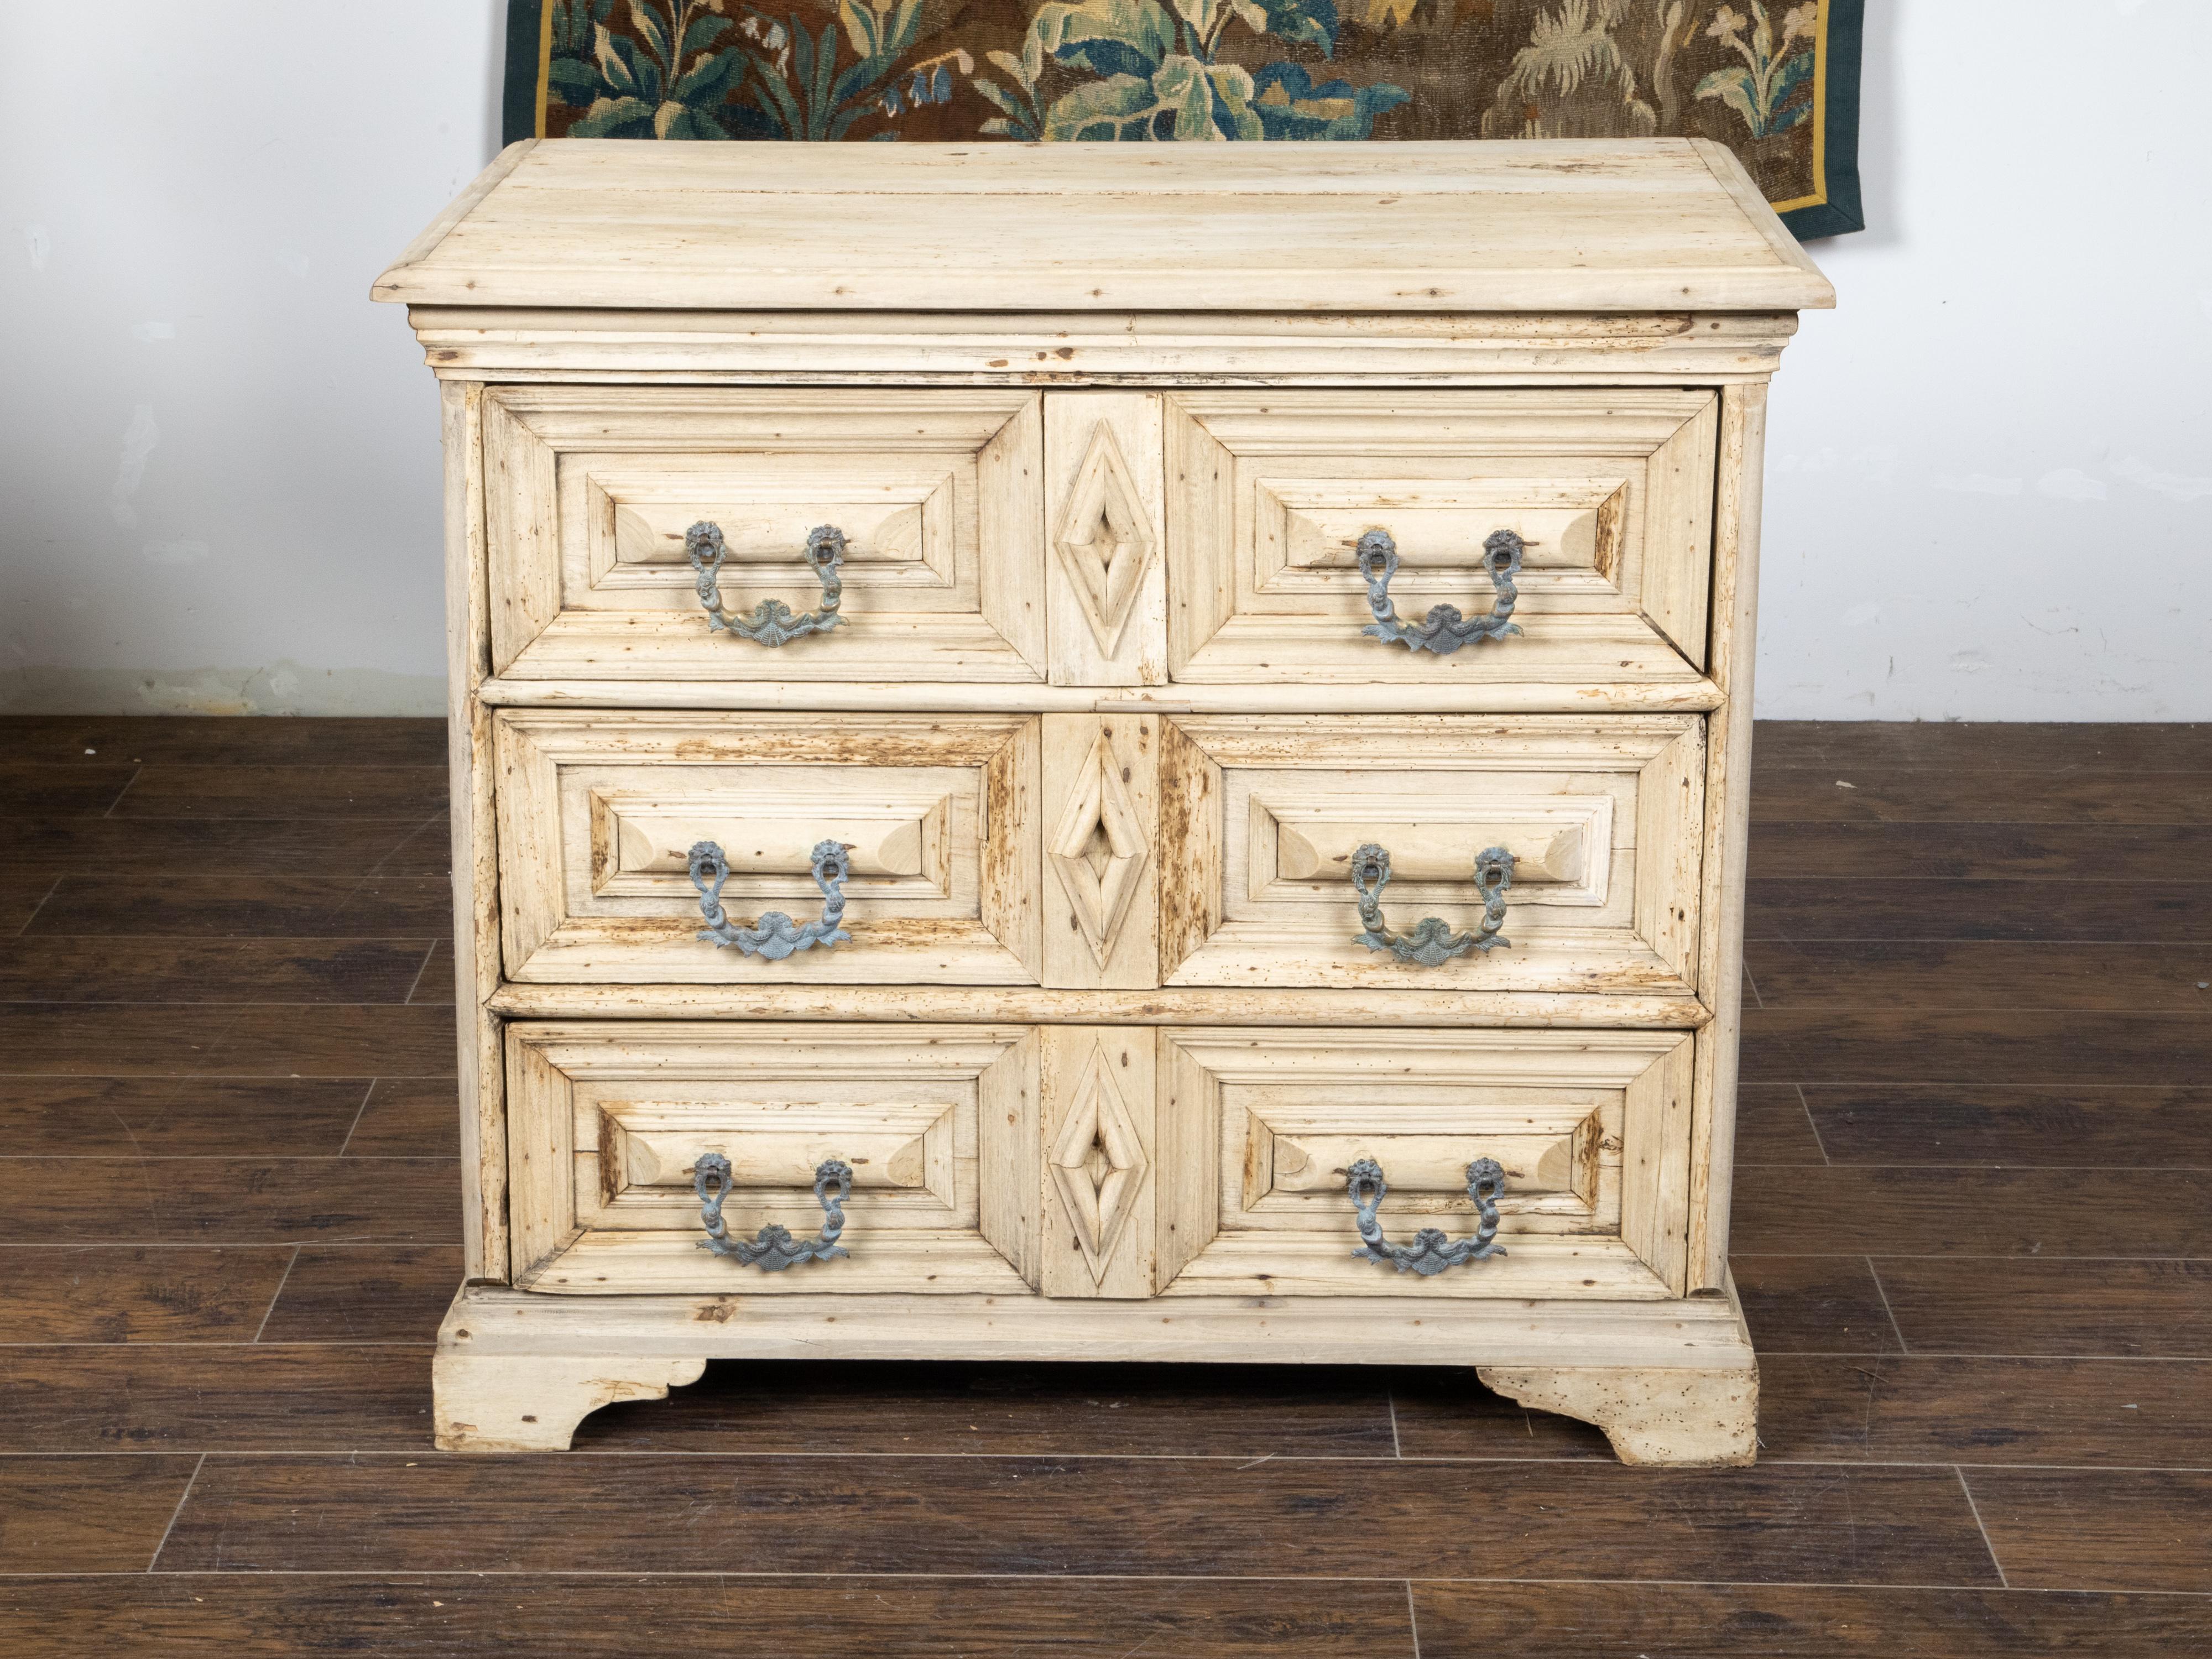 An English bleached oak geometric front chest from the 19th century with three drawers, carved diamond motifs, ornate hardware and great rustic character. Created in England during the 19th century, this bleached oak chest features a rectangular